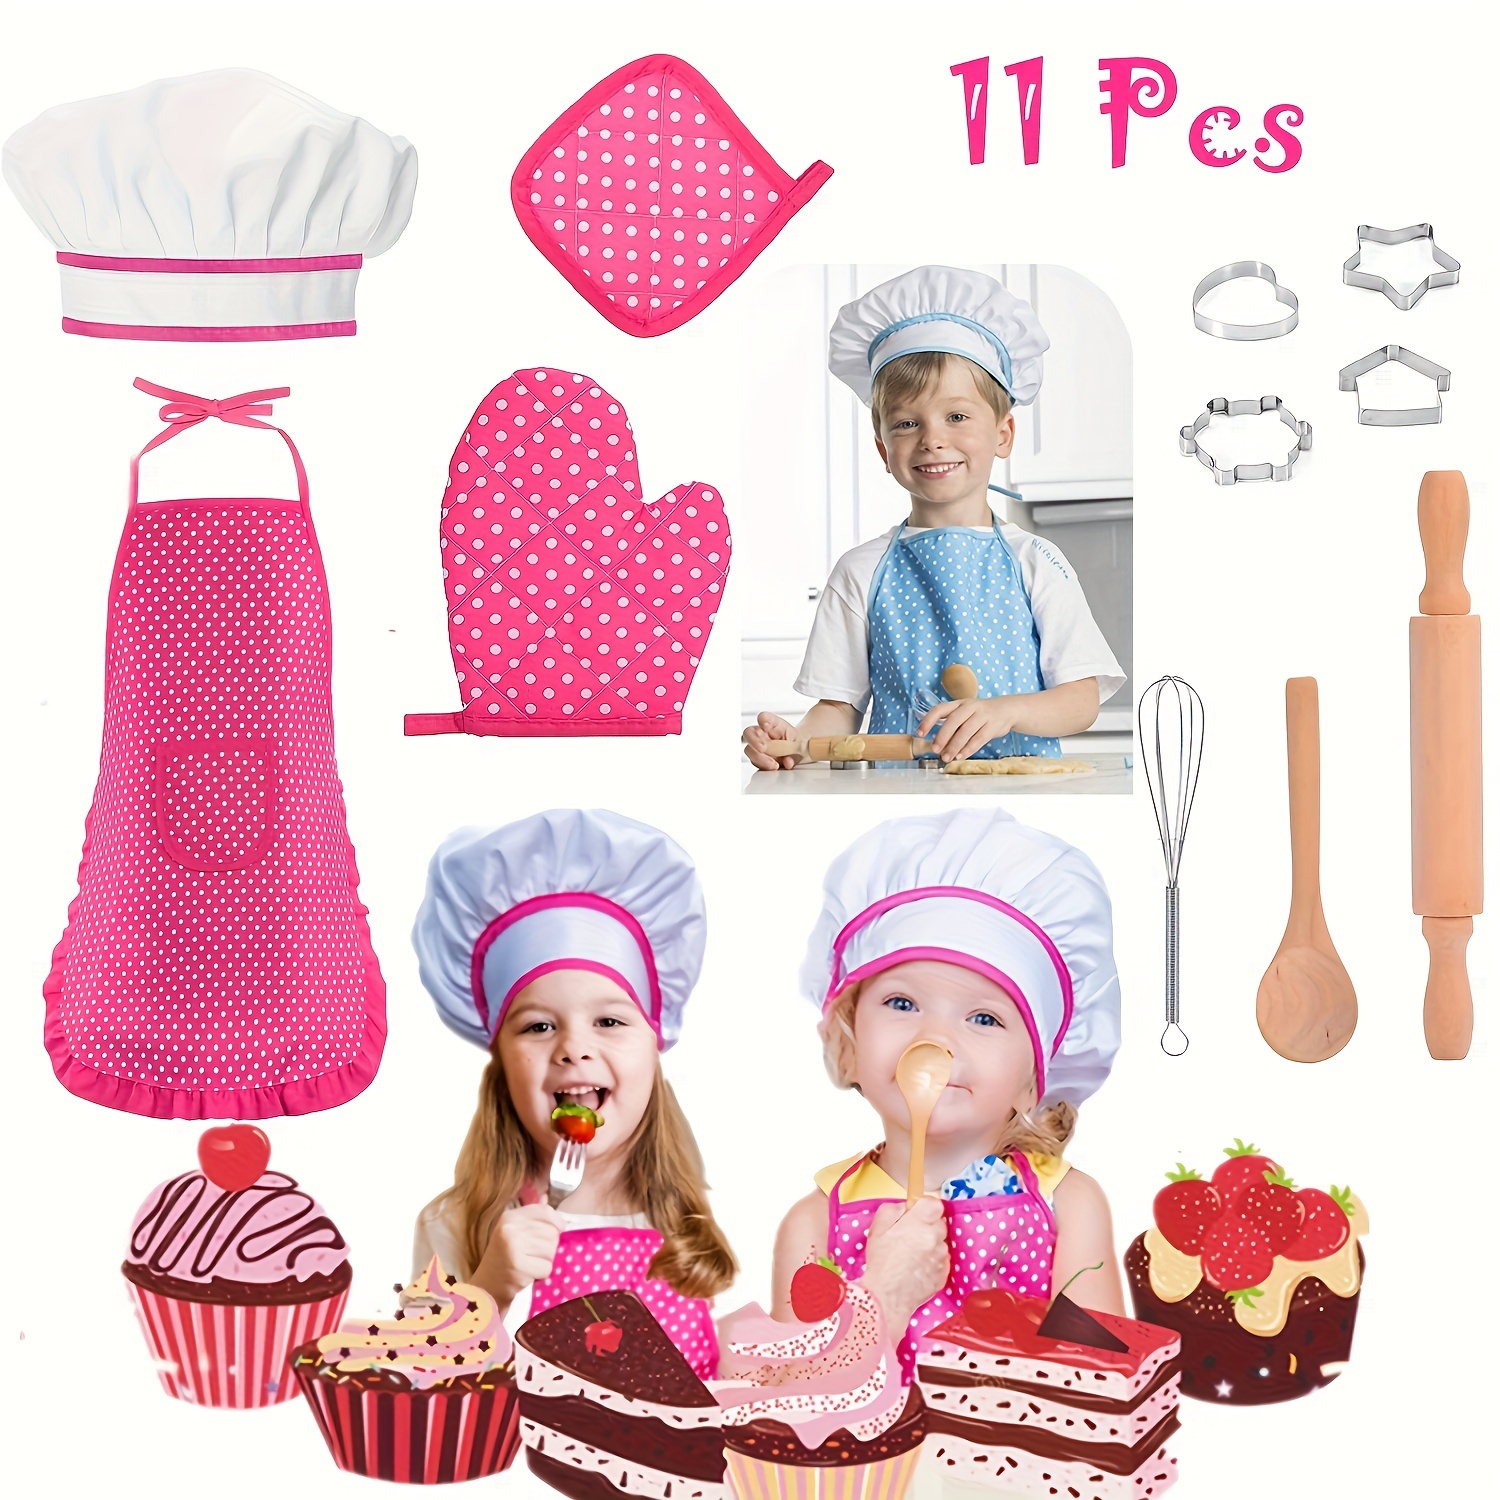 Children' S Artist Aprons and Painting Play Waterproof PE PVC Smock Bib -  China Waterproof Apron and Kids Painting Apron price